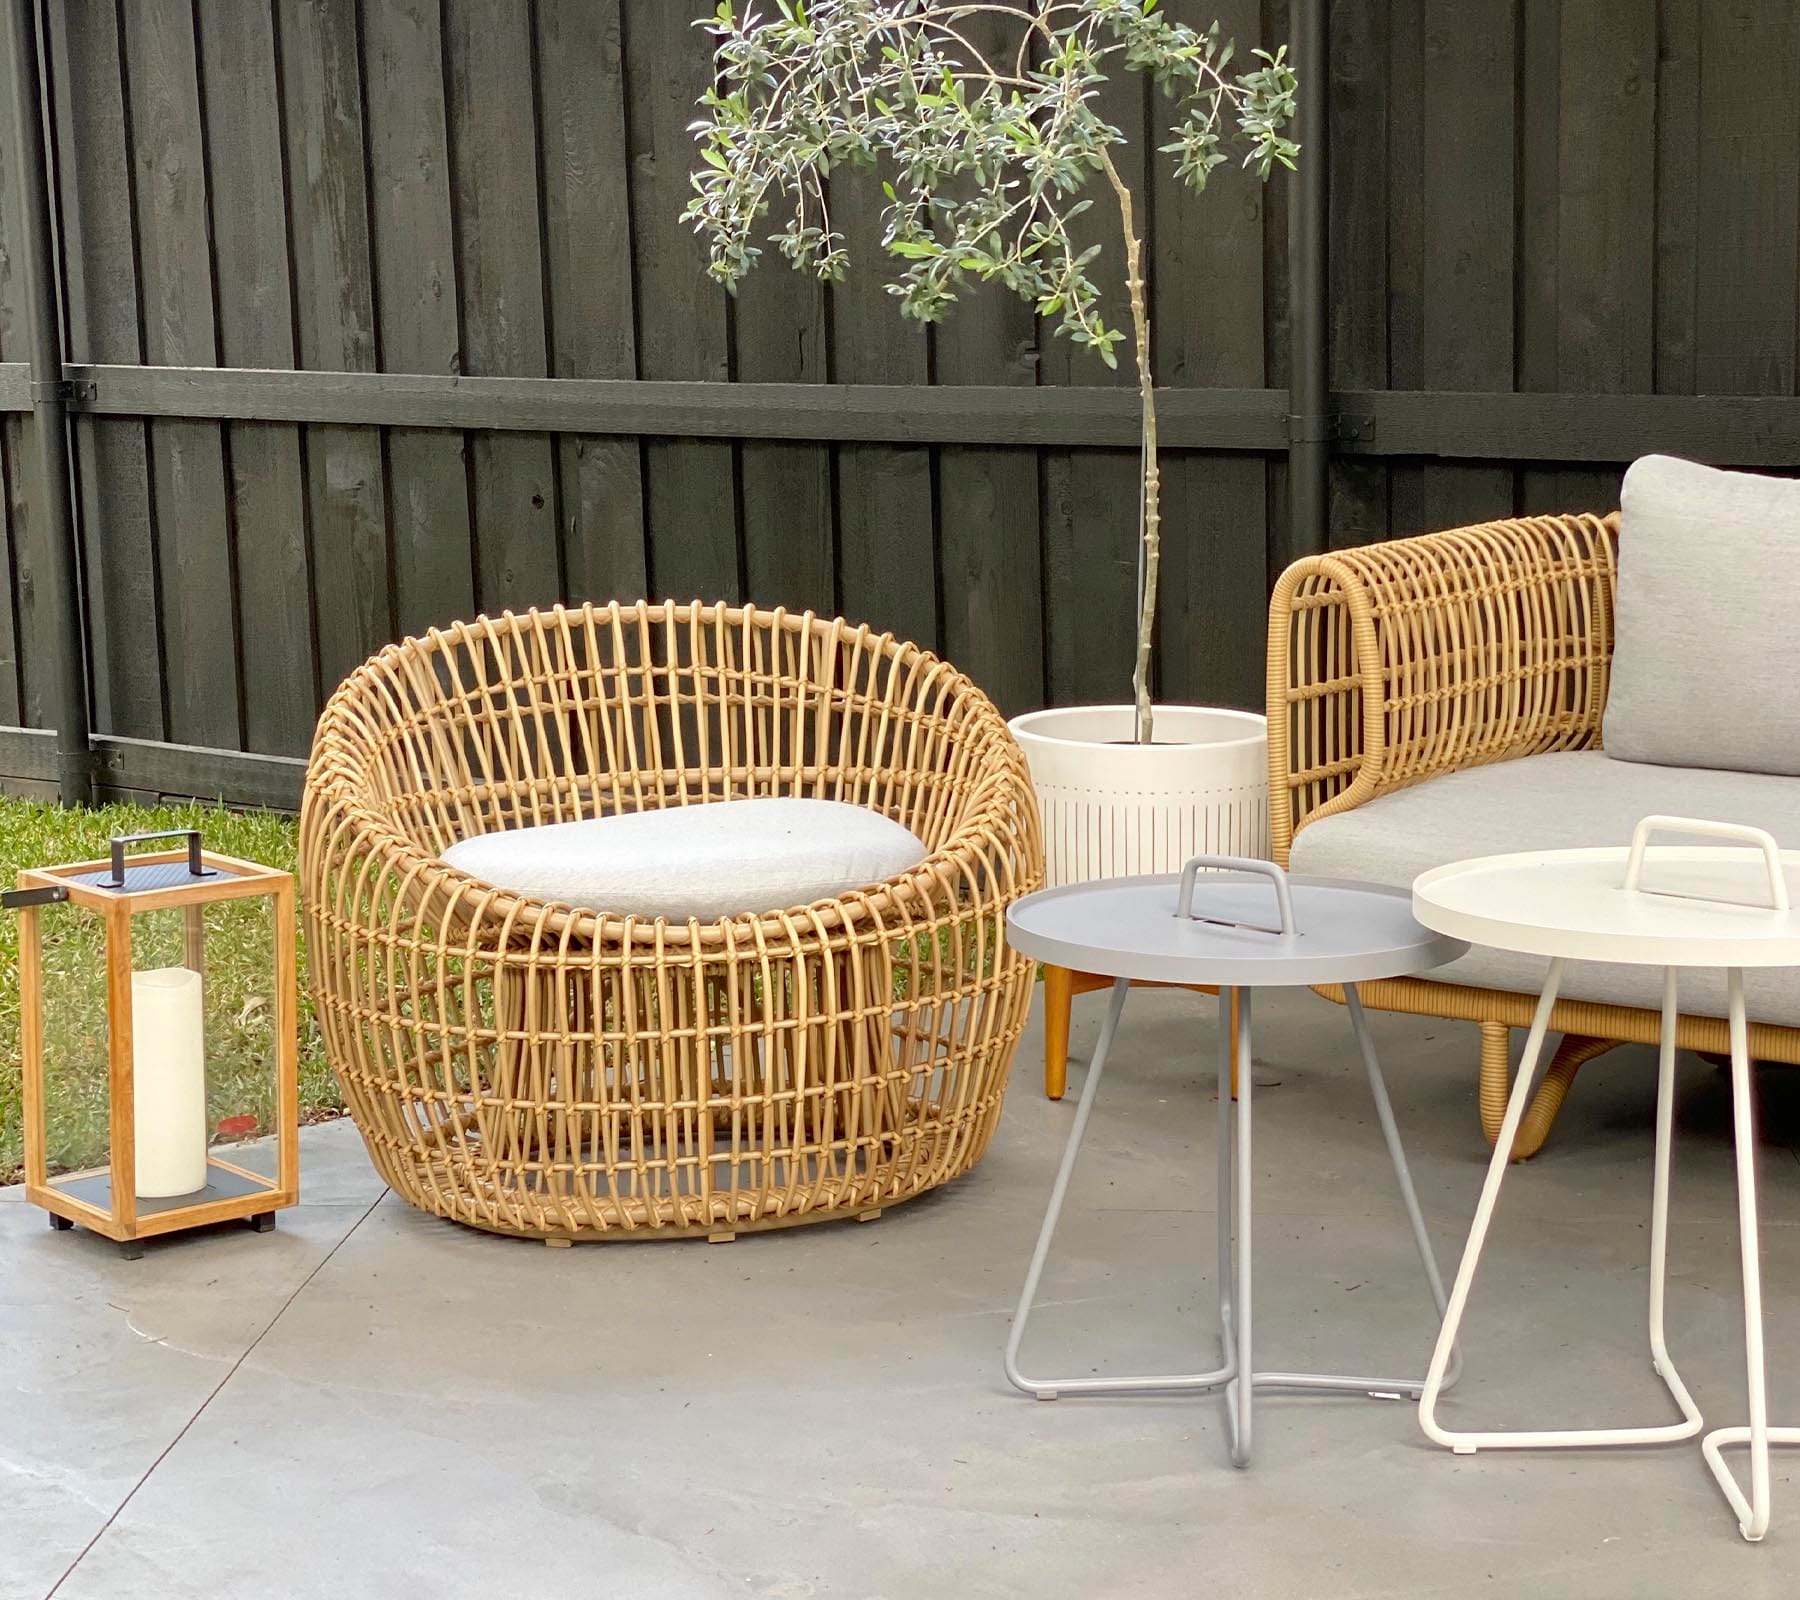 Boxhill's Nest Round Rattan Chair lifestyle image at patio with Nest 2-Seater Sofa, Lighthouse Outdoor Large Teak Lantern and 2 small round table